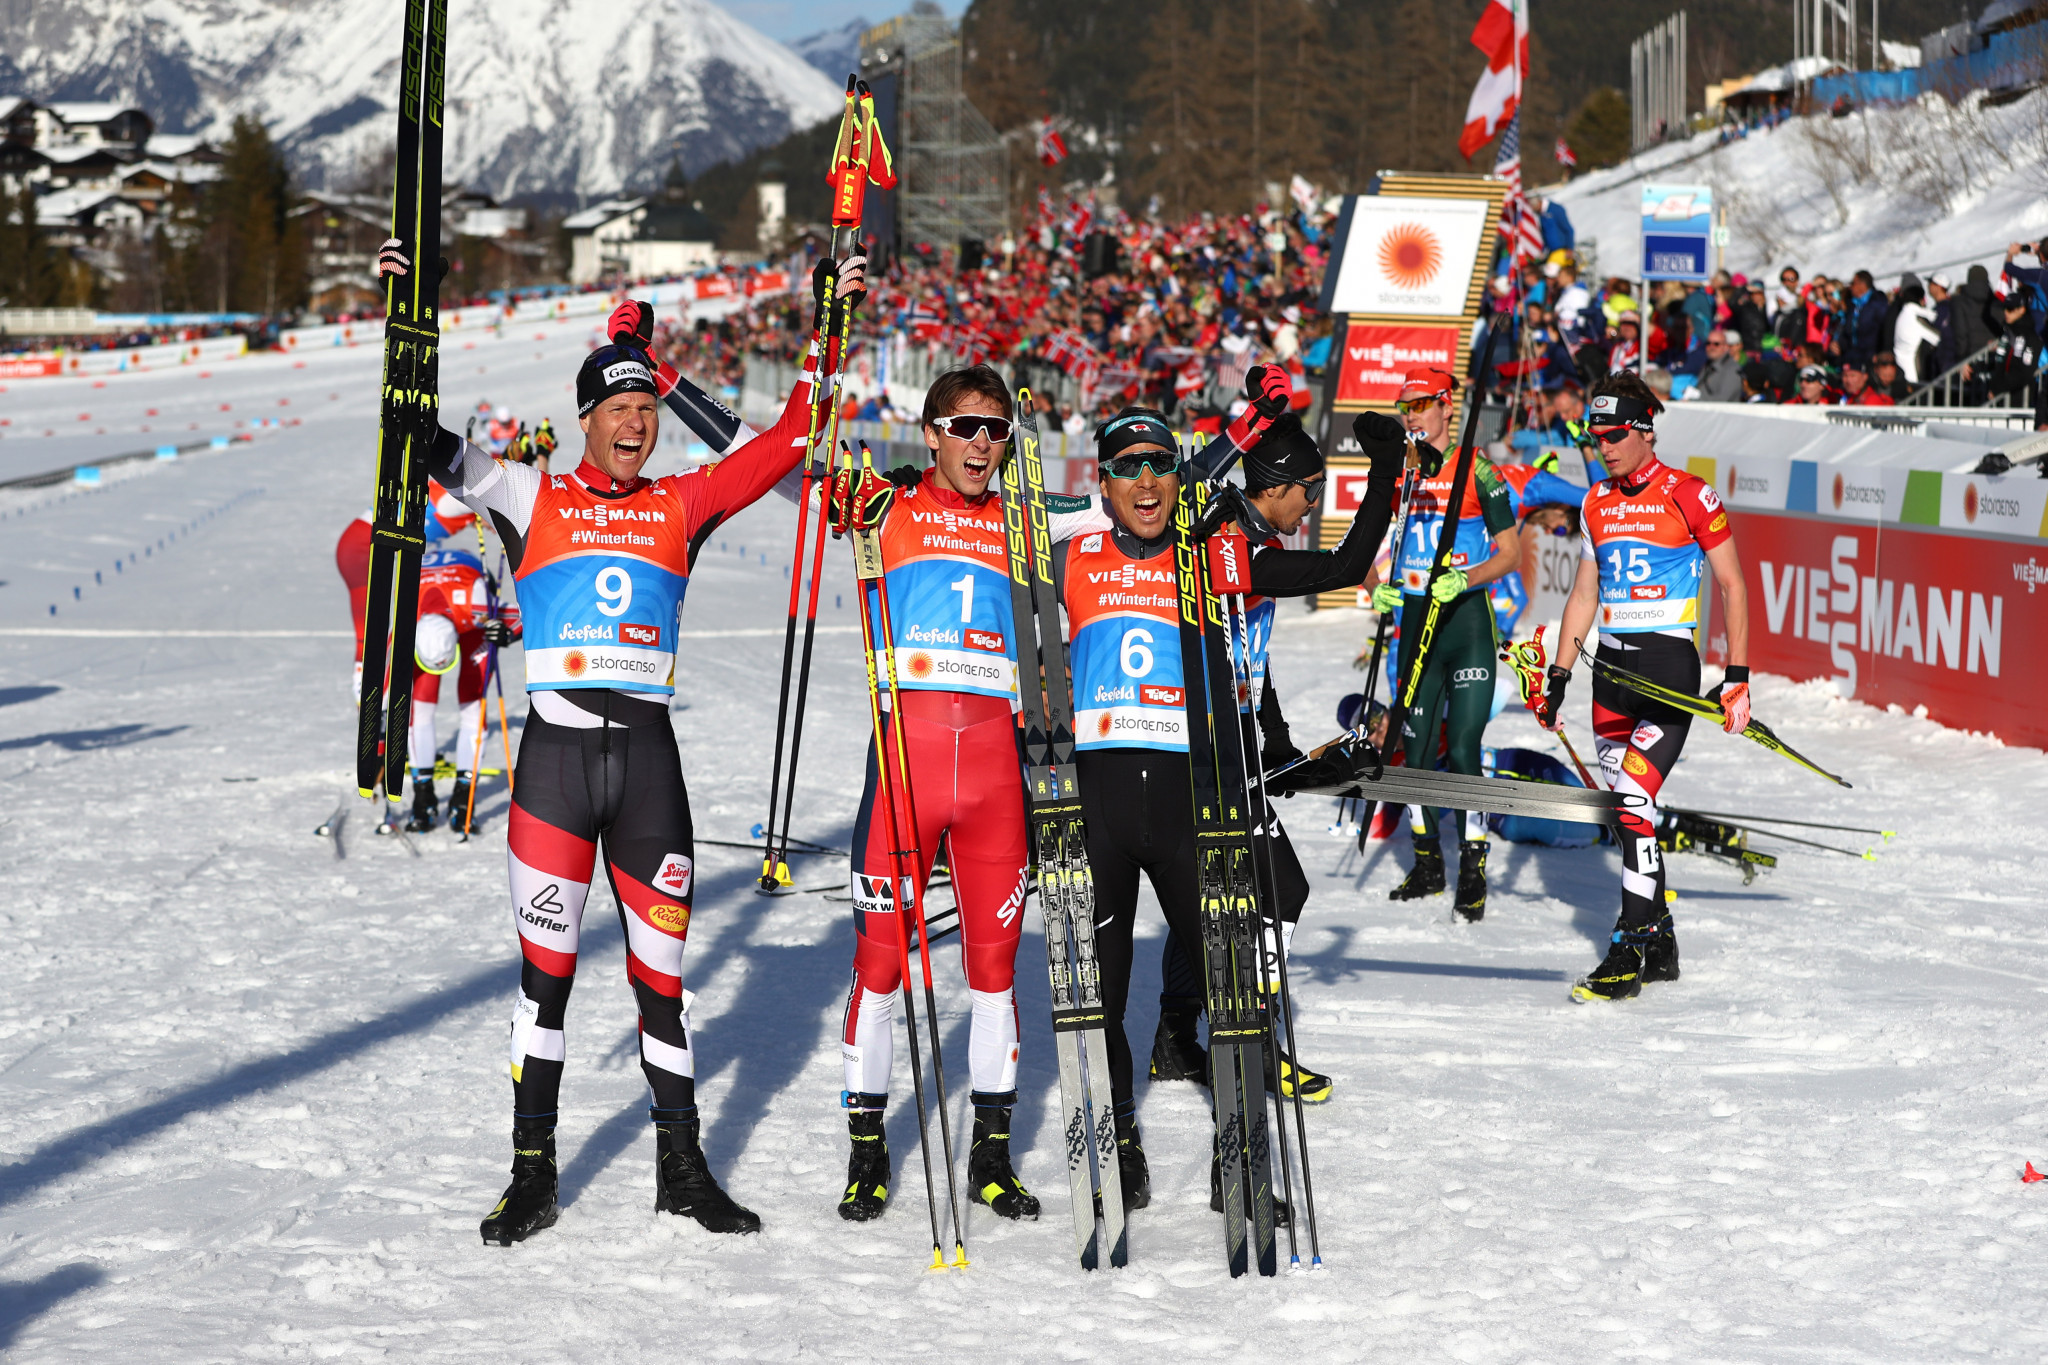 The podium was completed by Bernhard Gruber of Austria and Japan's Akito Watabe ©Getty Images